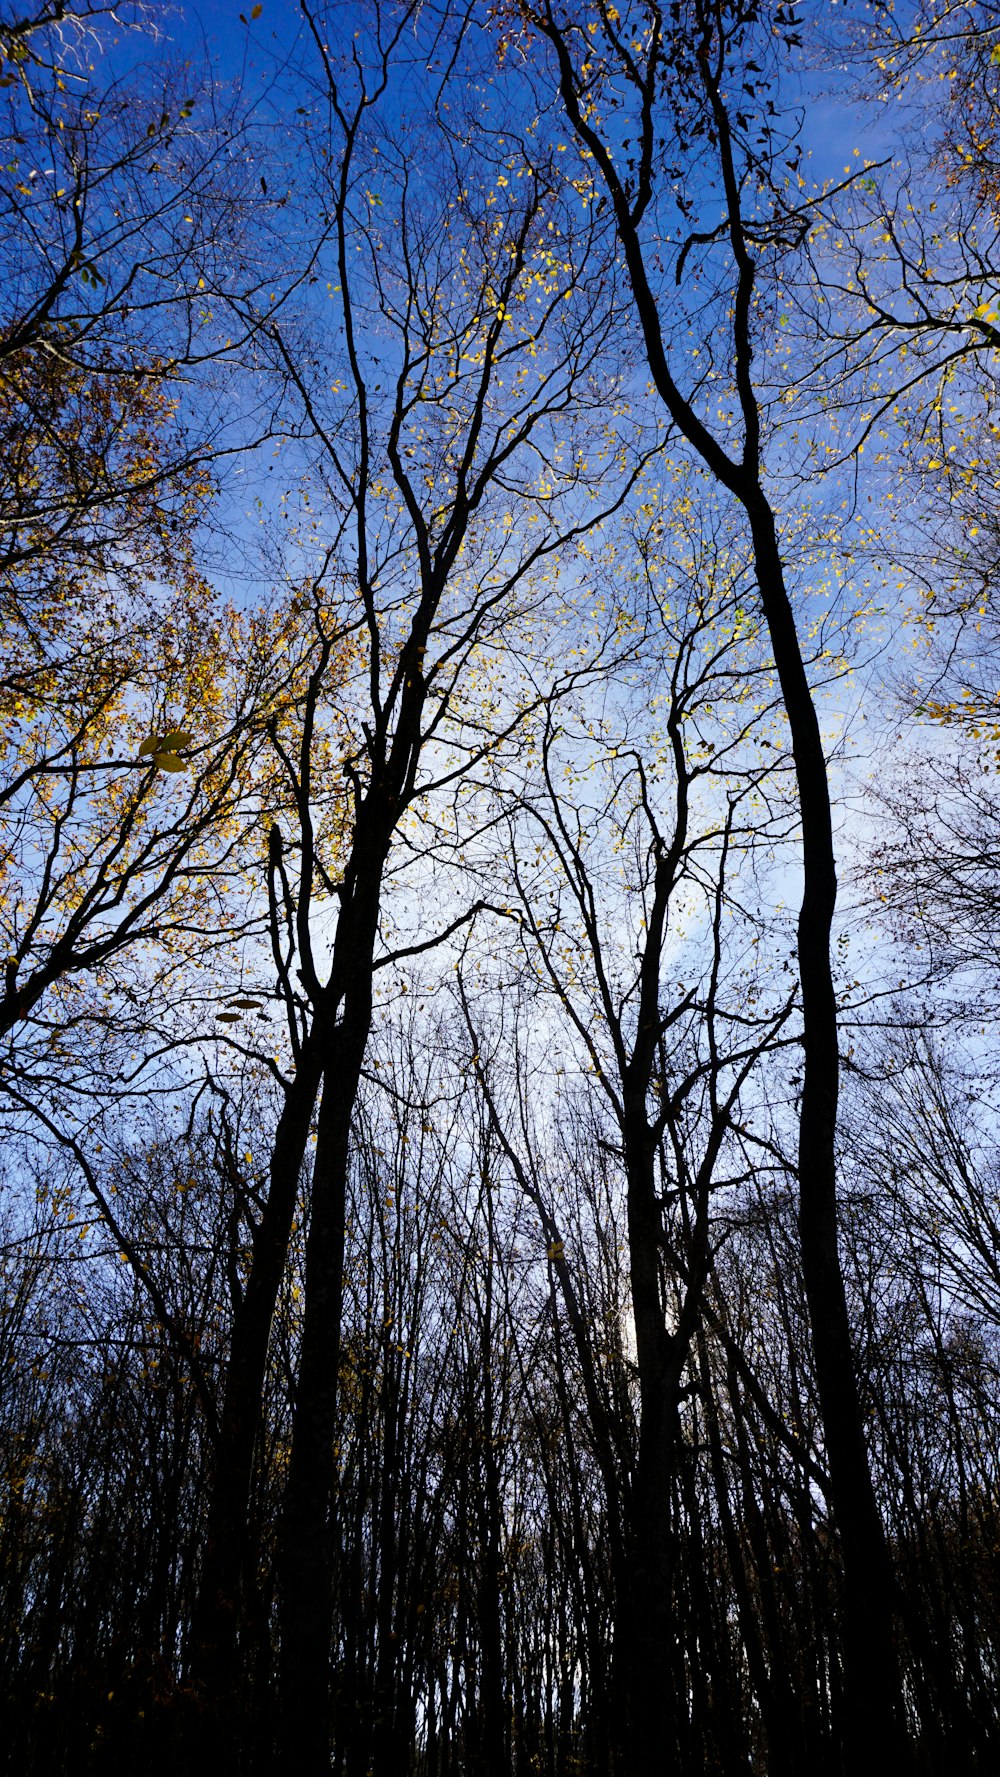 a group of trees with no leaves on them